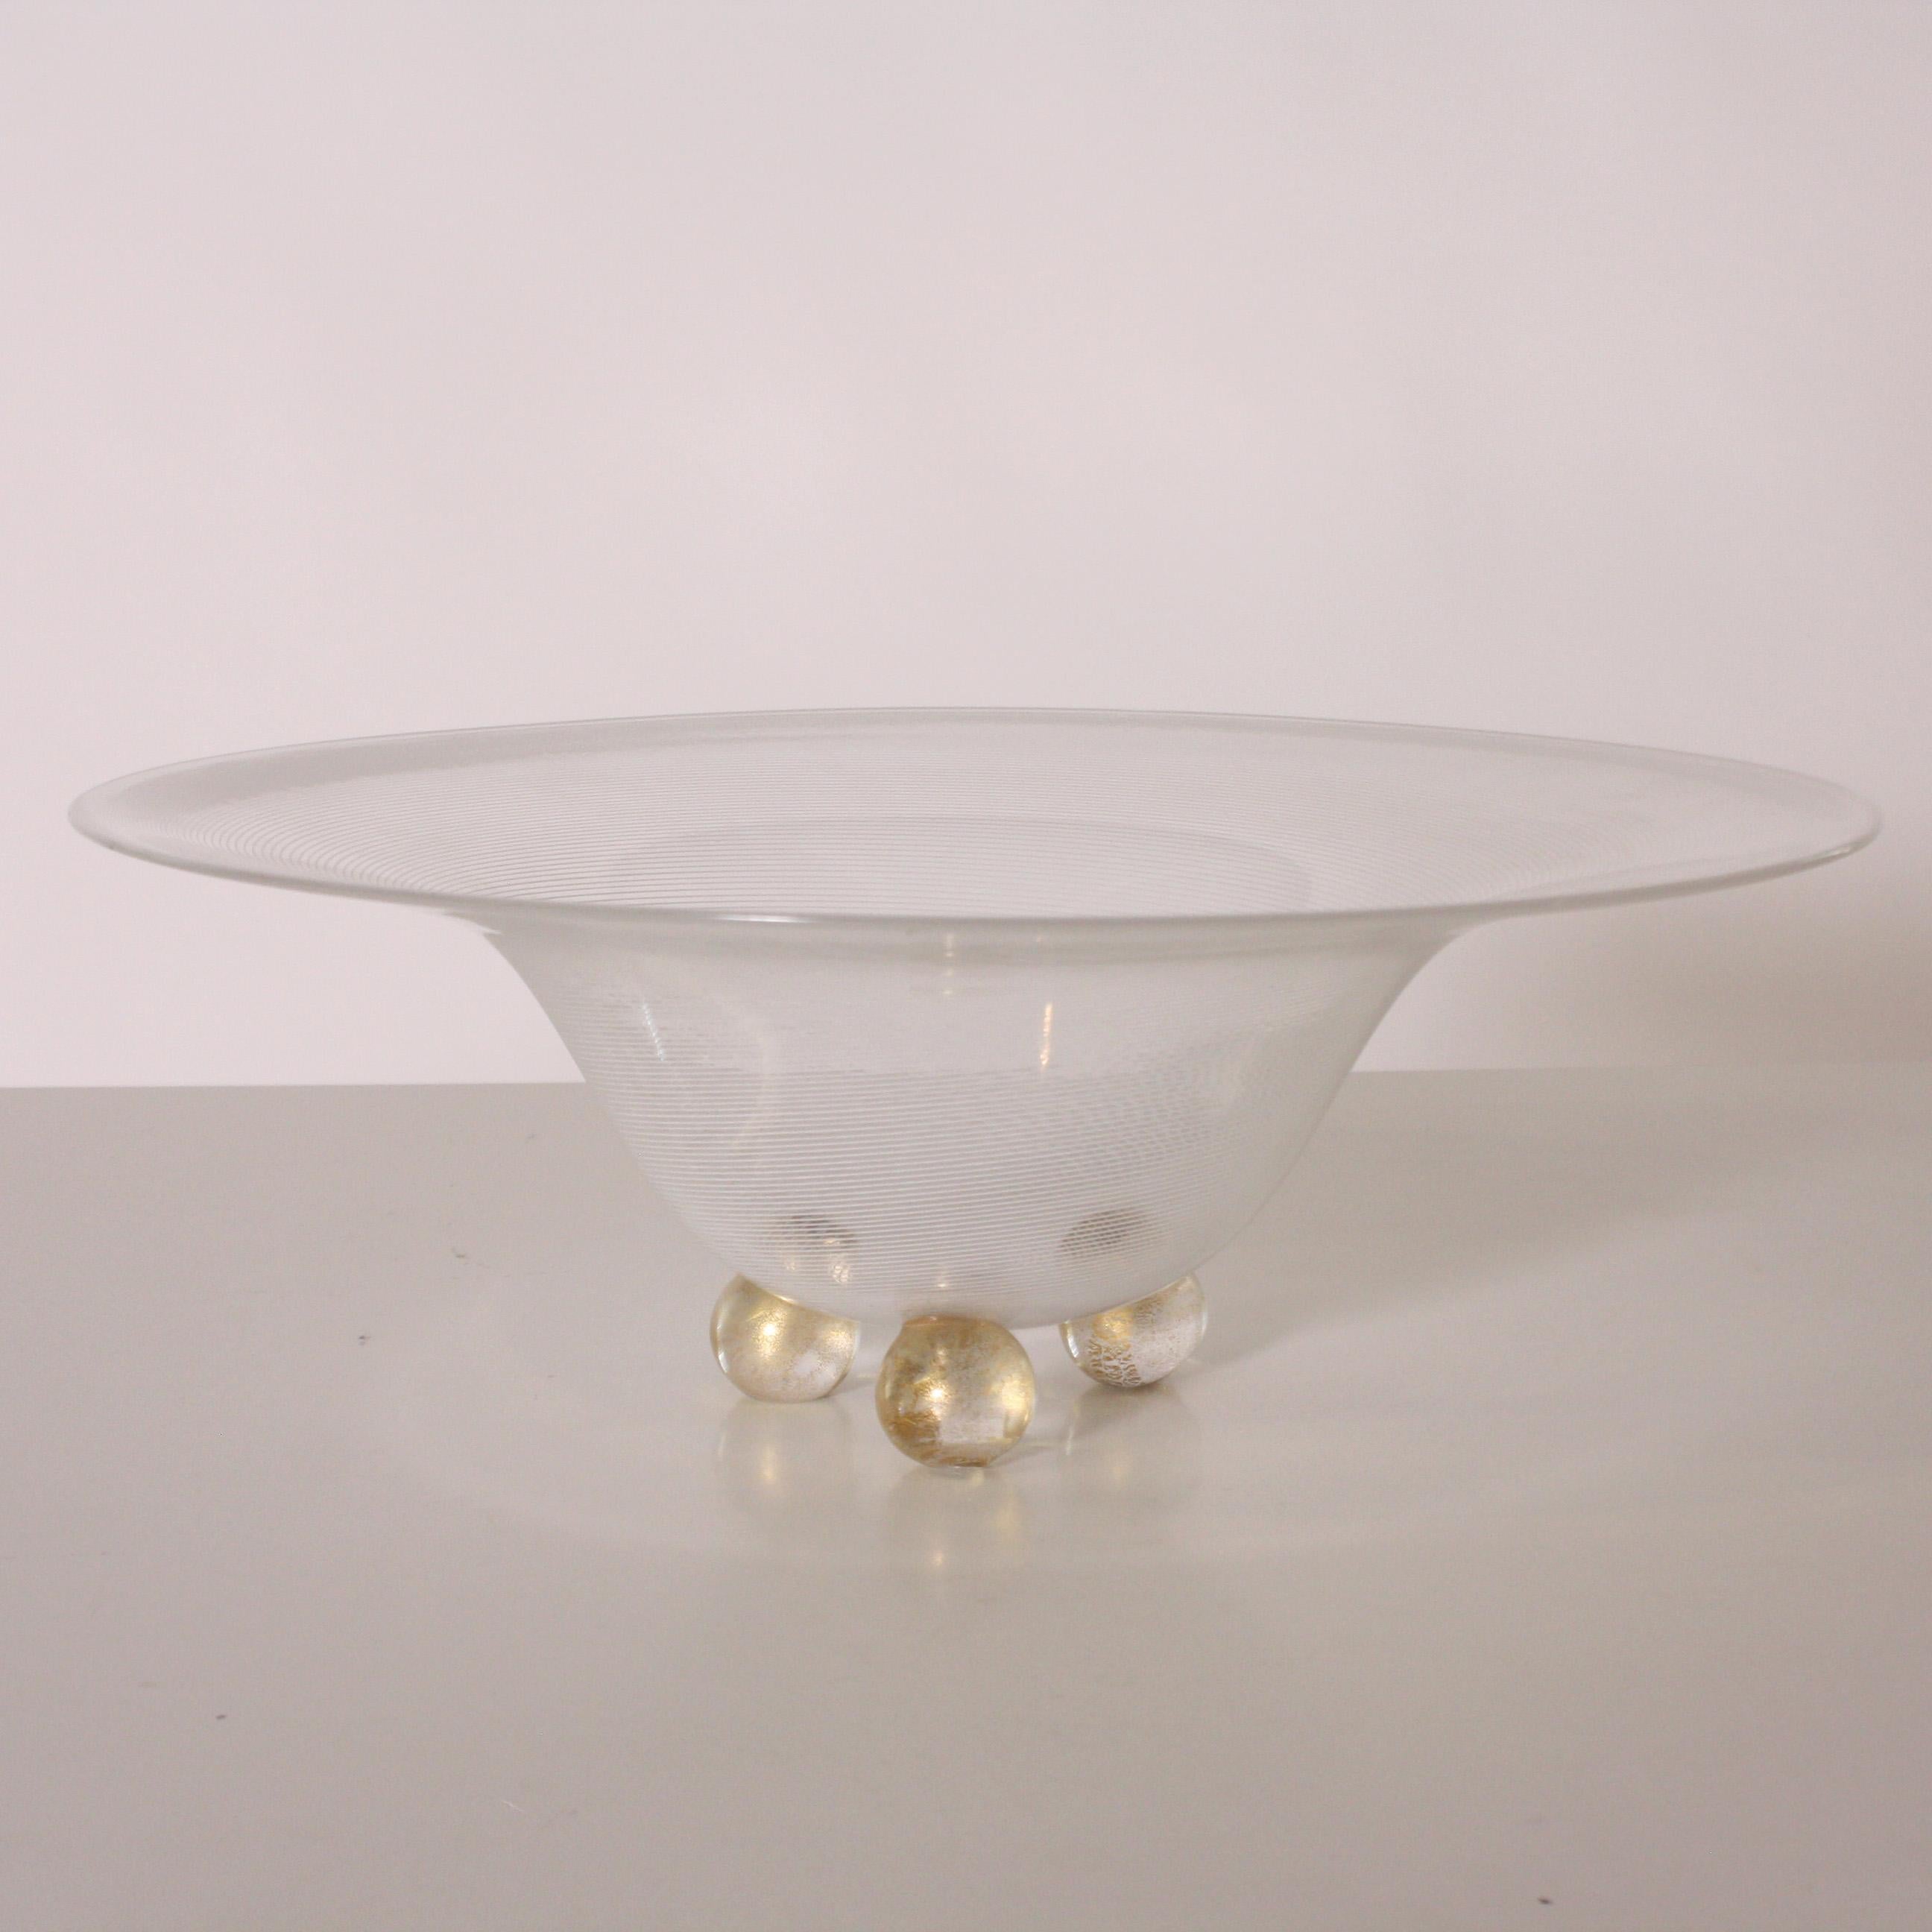 Cenedese Murano bowl with 22-karat gold inclusions, circa 1950.
 